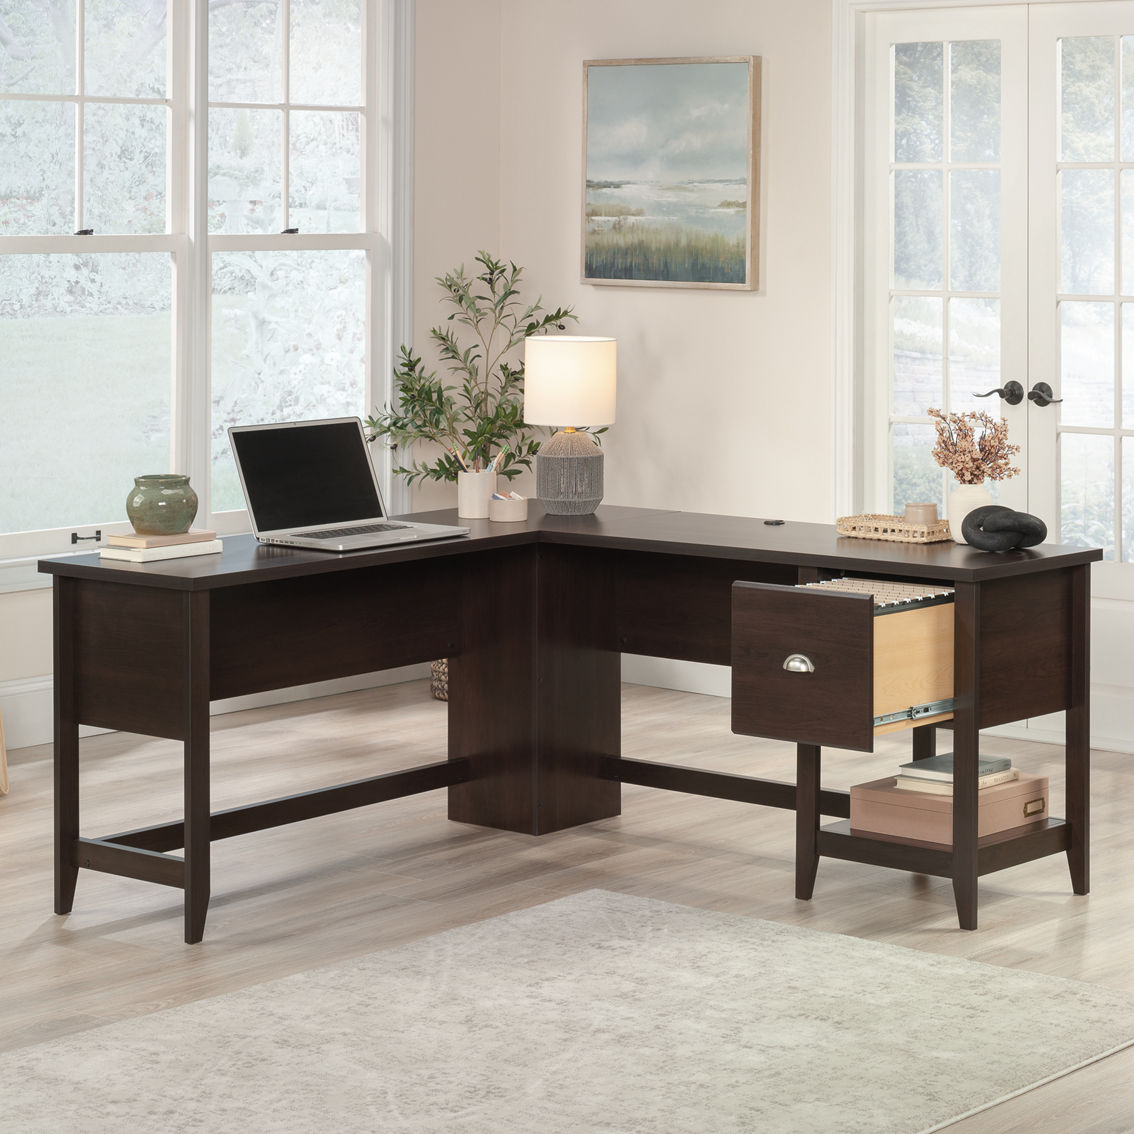 Sauder Summit Station L-Shaped Home Office Desk with Drawer - Image 2 of 3